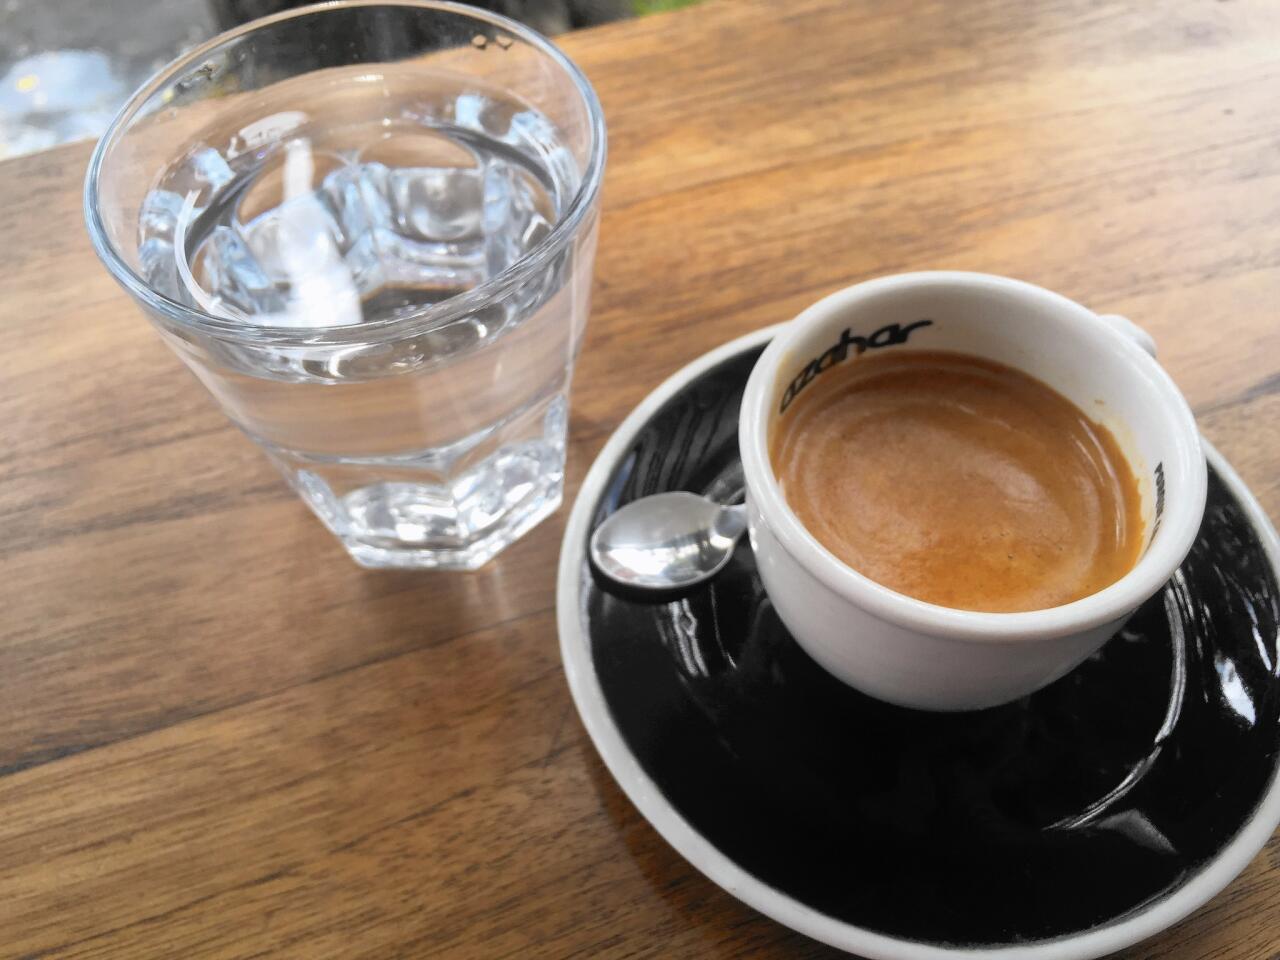 Water with espresso